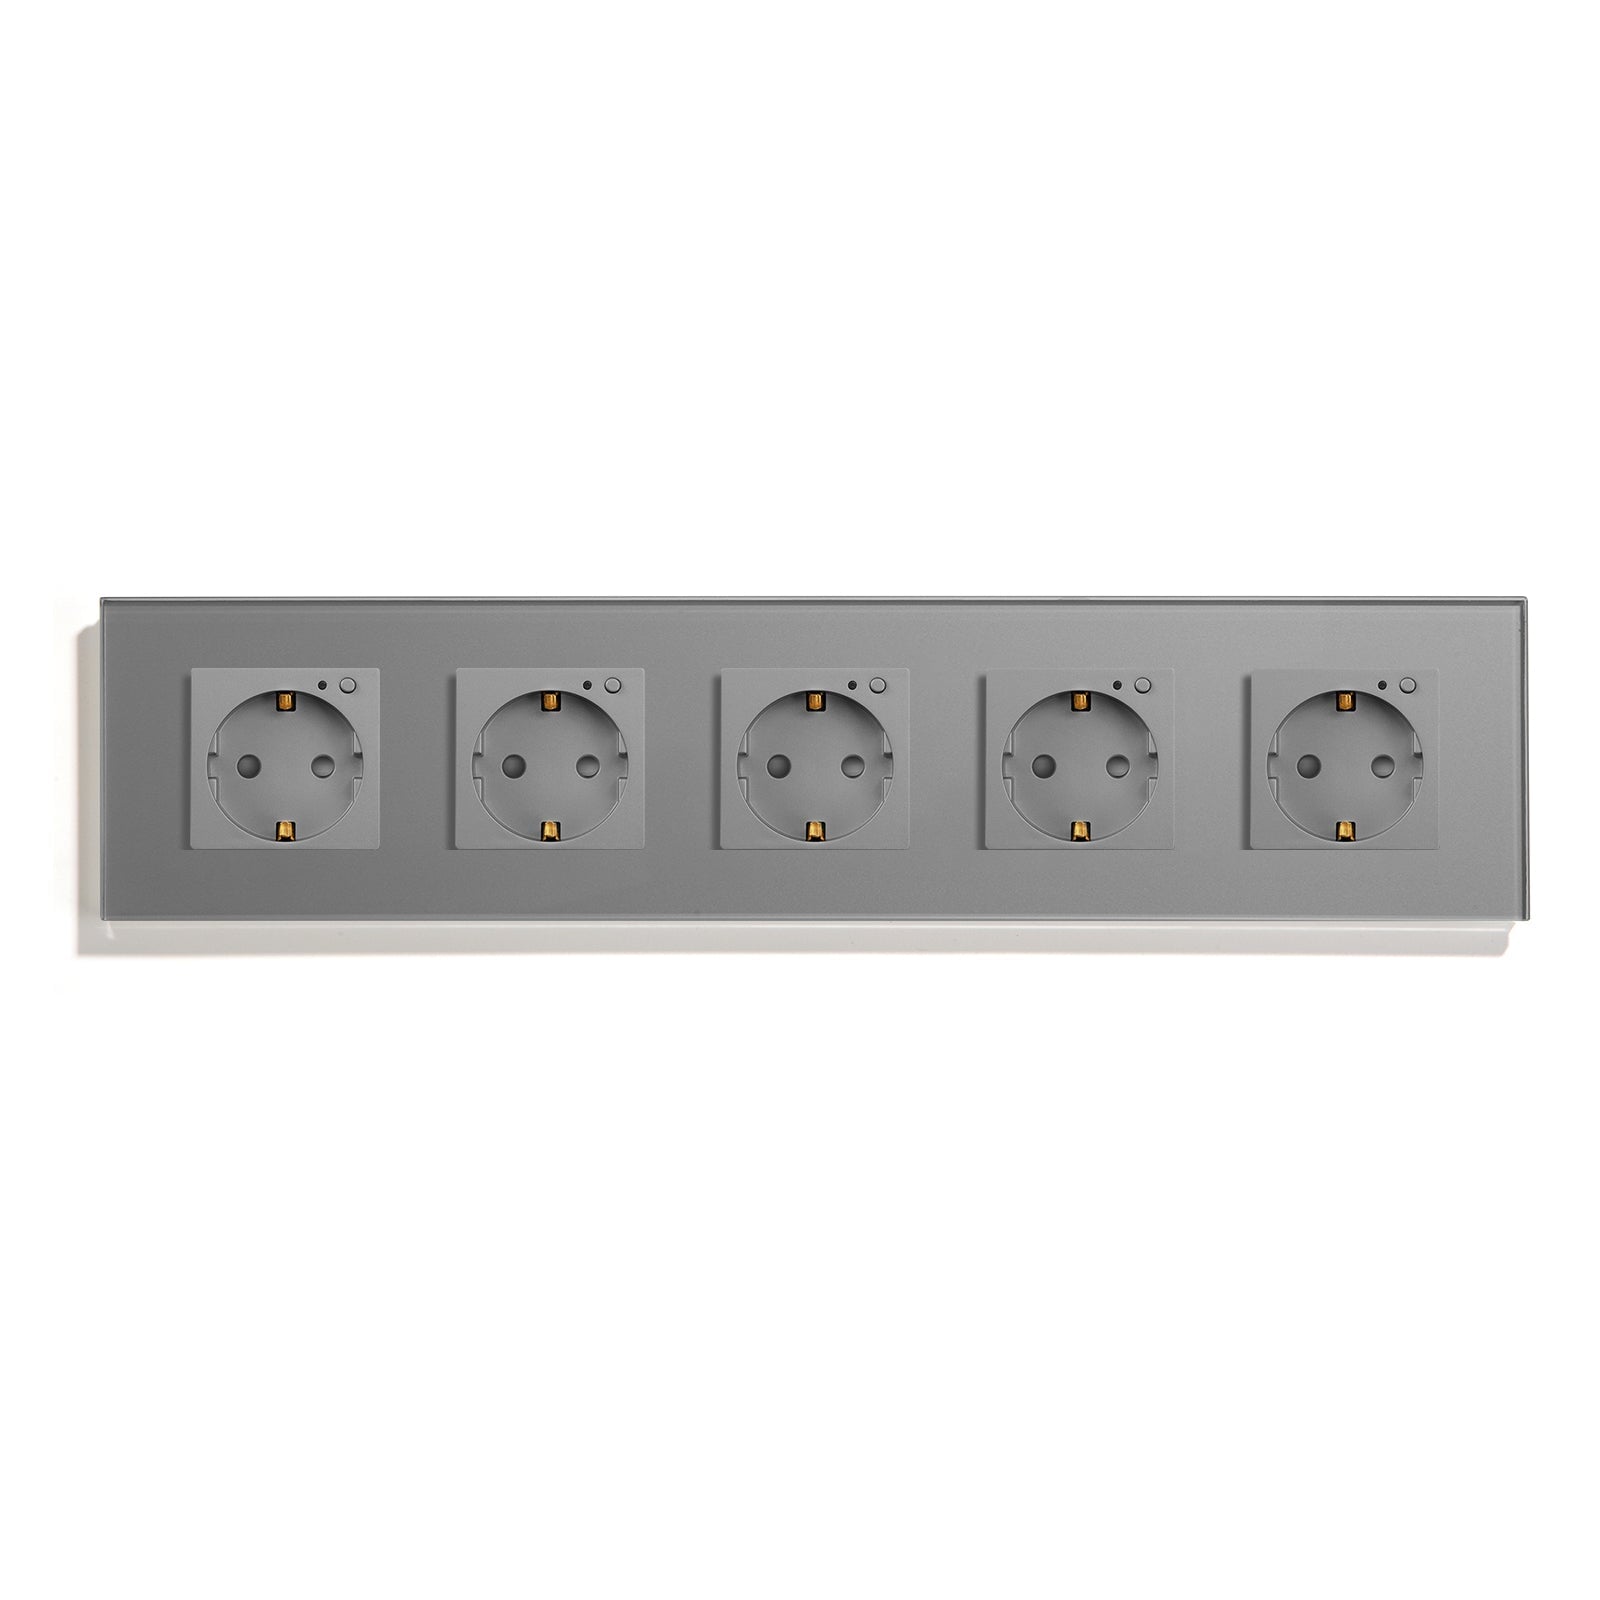 Bseed Wifi EU Standard Socket Wall Sockets With Energy Monitoring Power Outlets & Sockets Bseedswitch Grey Quintuple 